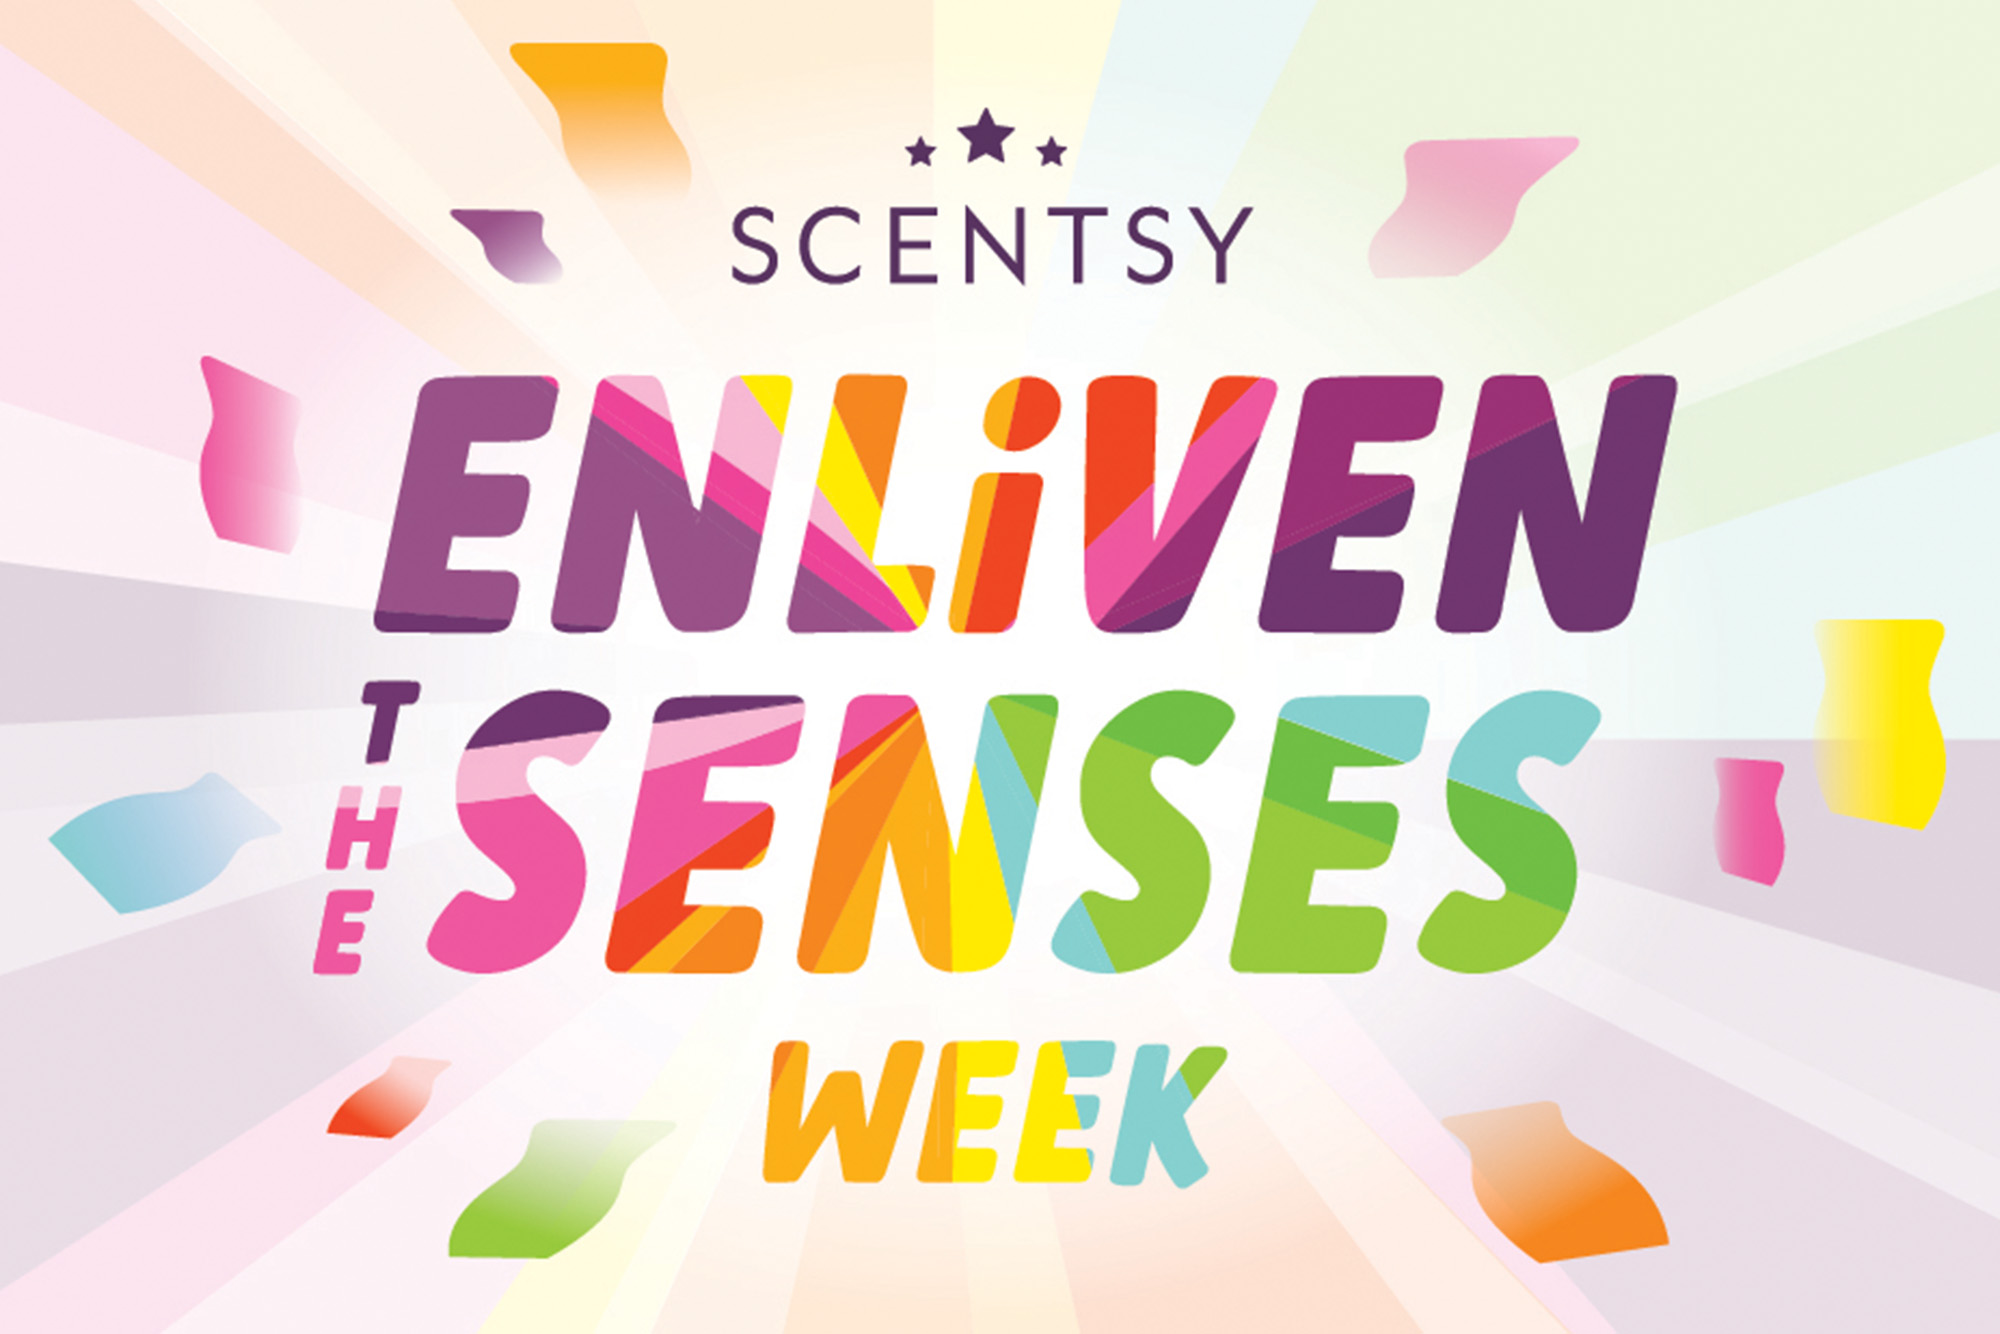 Celebrate Enliven the Senses Week with Scentsy